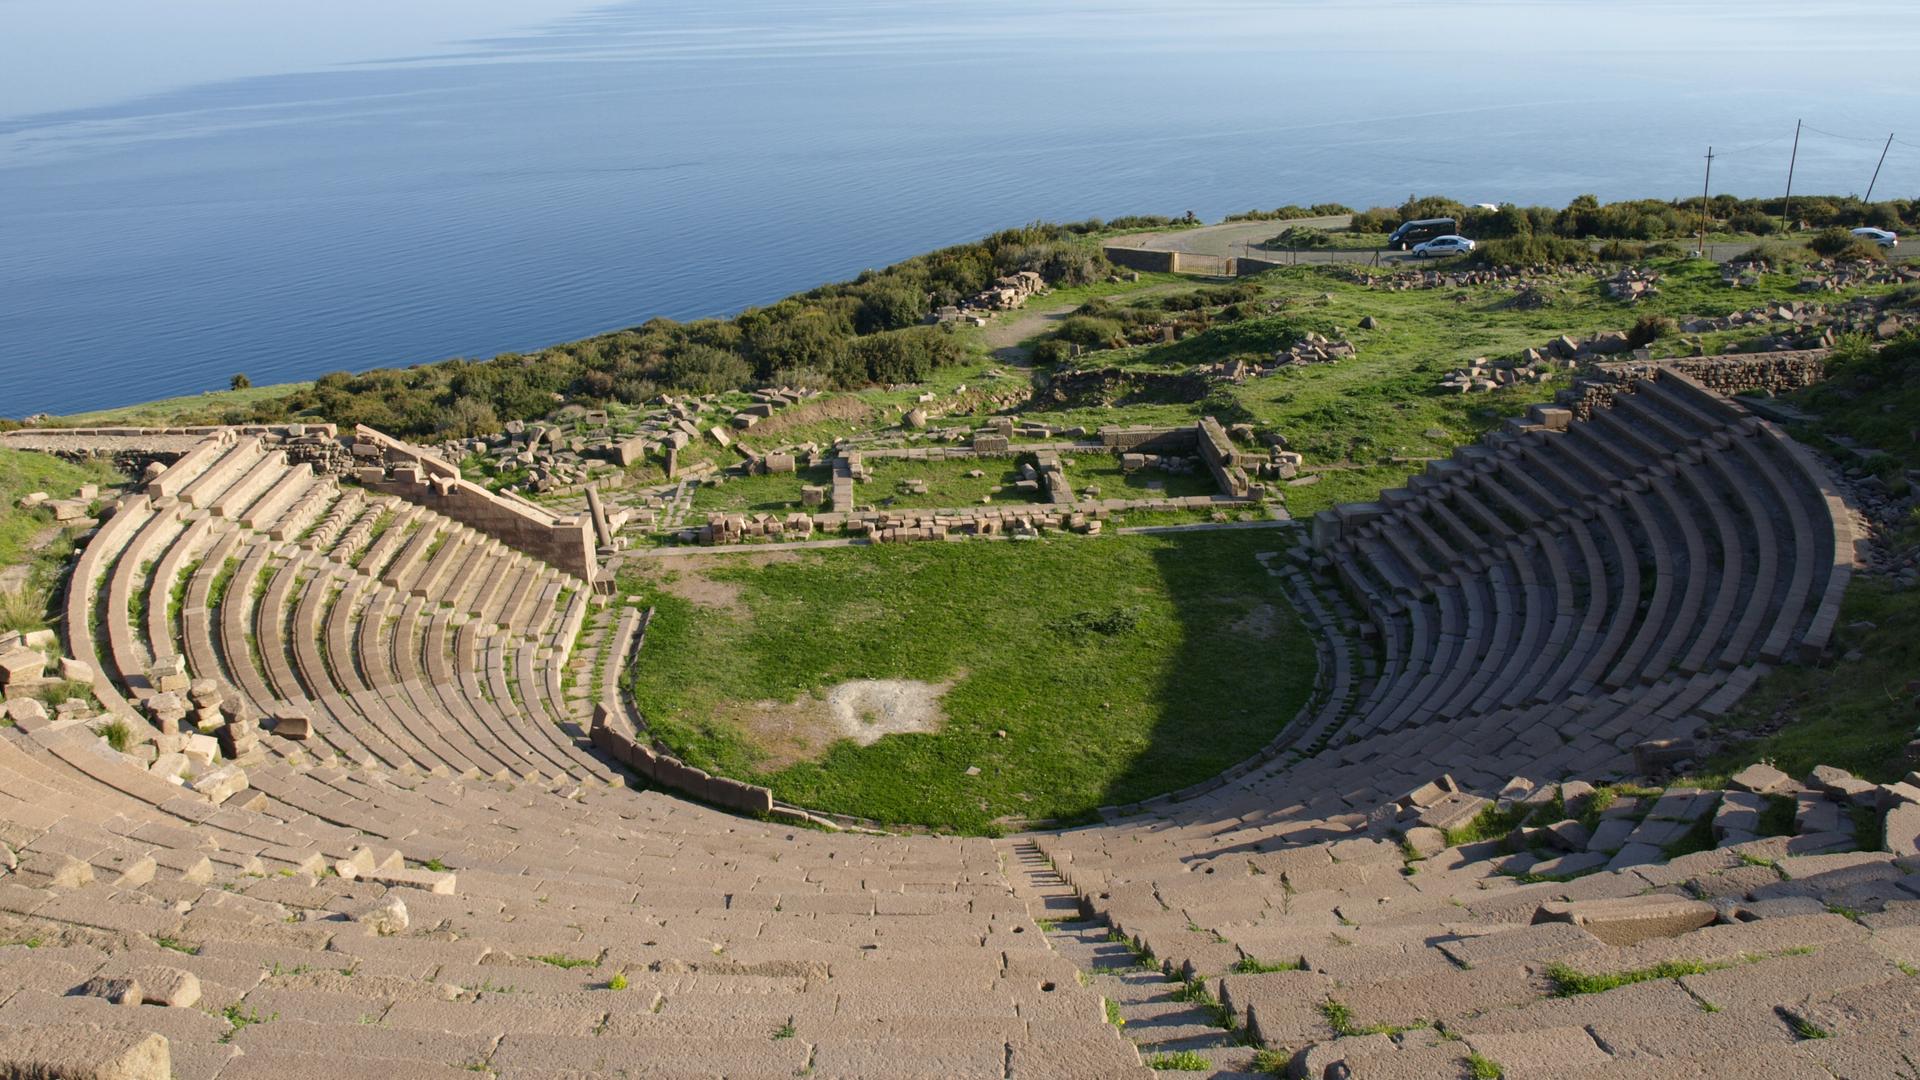 The ancient Theatre of Assos overlooking the Aegean Sea, with the nearby island of Lesbos on the horizon, at right.